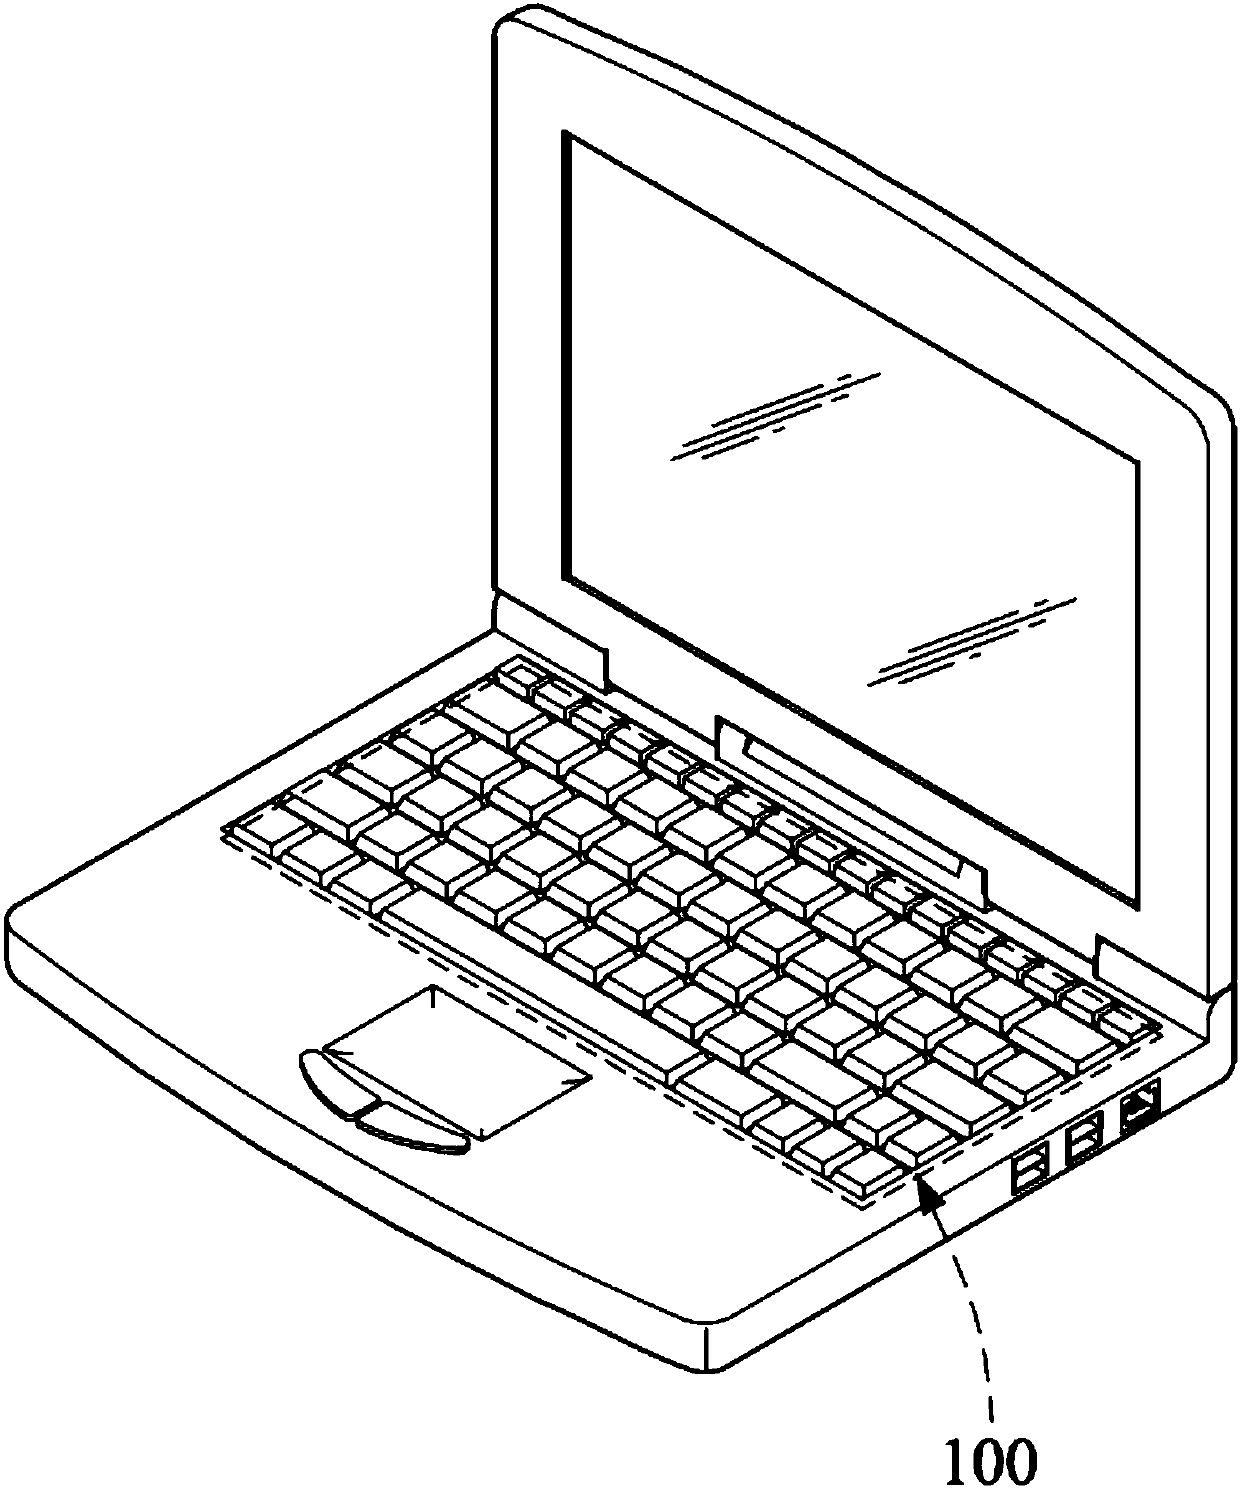 Keyboard backlighting device for portable computer